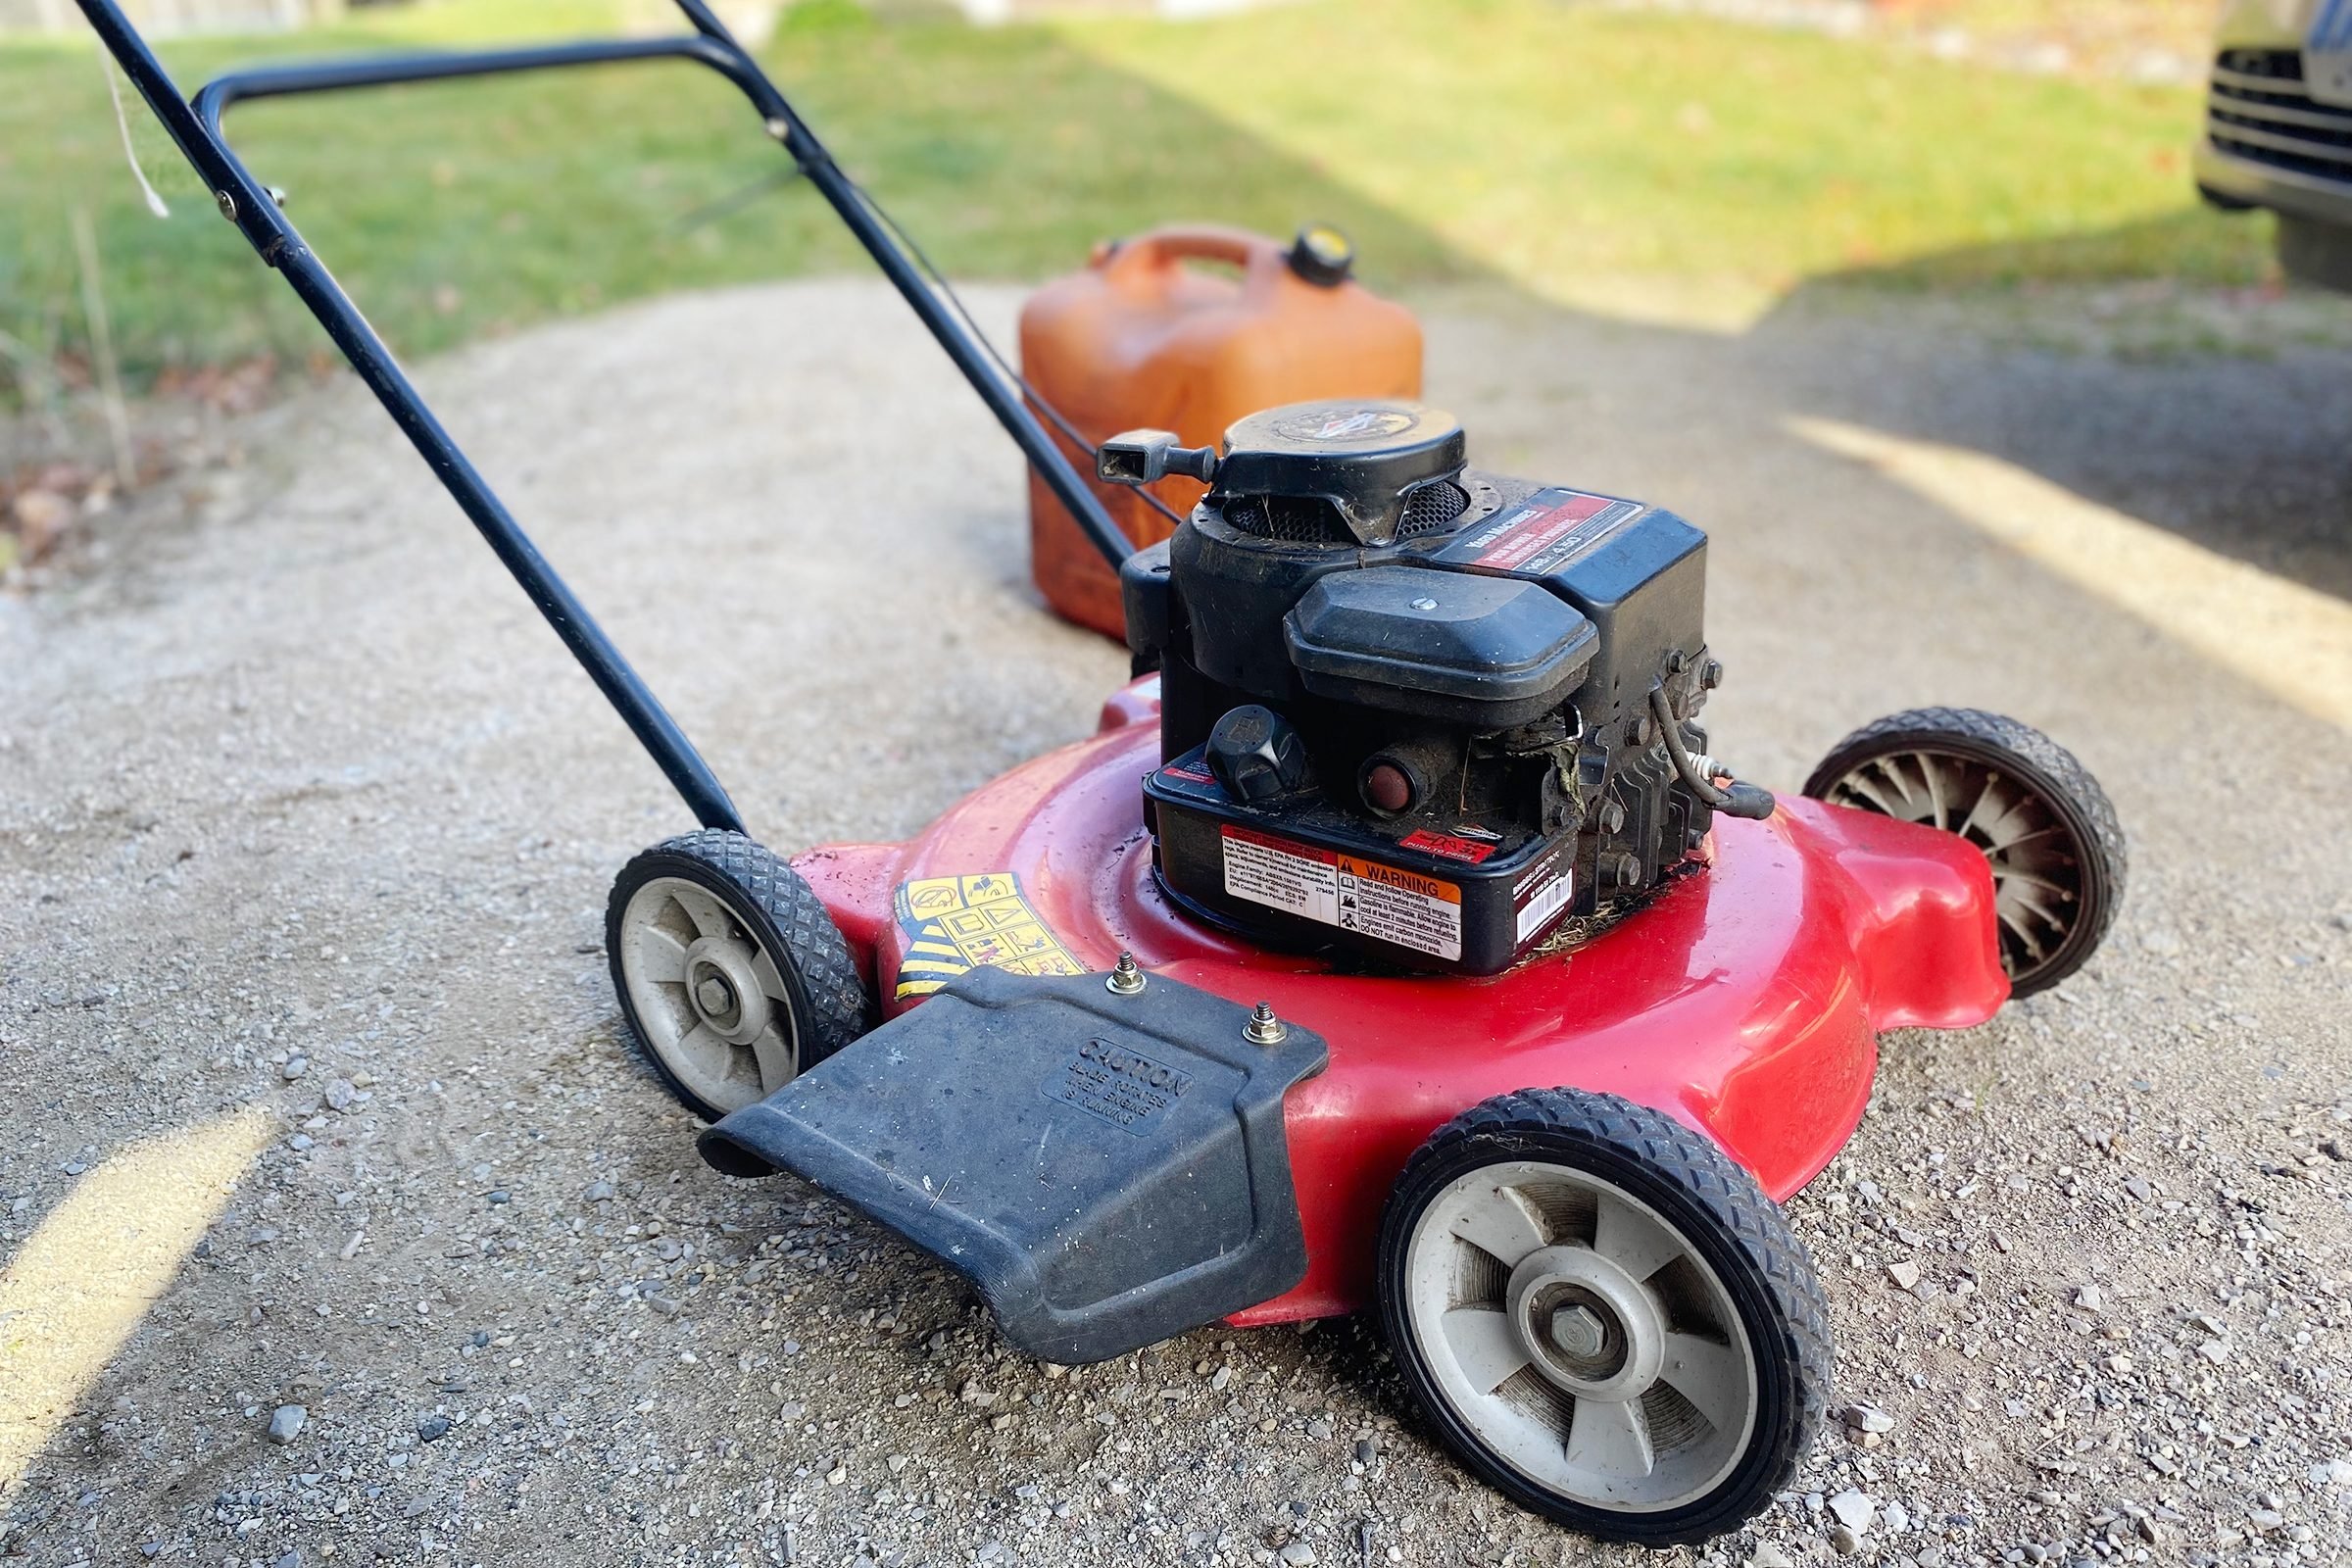 How To Drain Gas From a Lawn Mower